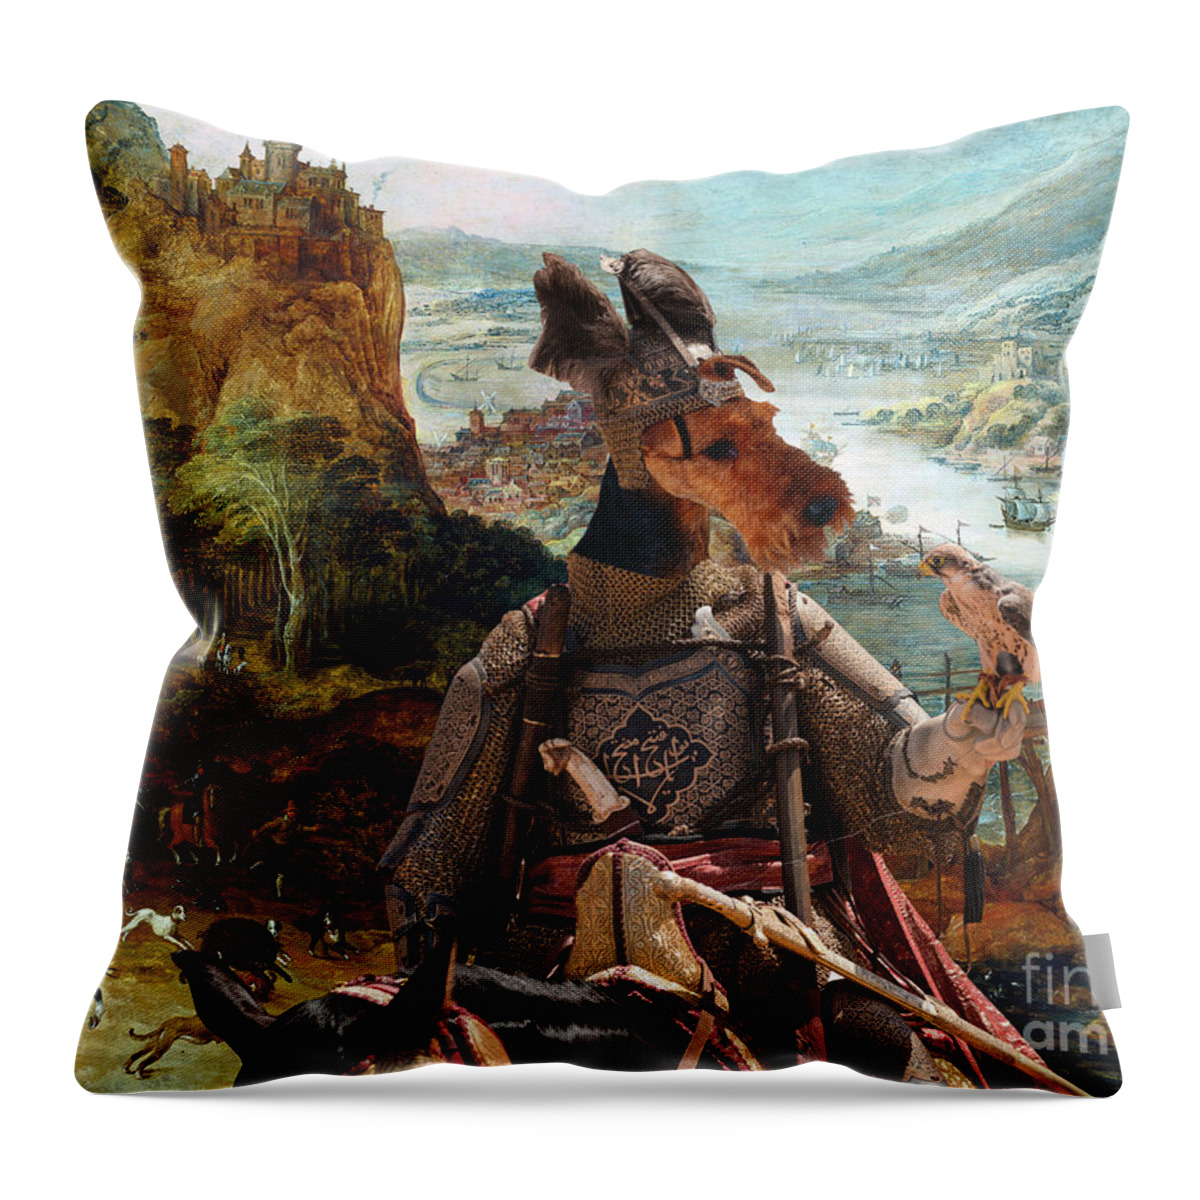 Welsh Terrier Throw Pillow featuring the painting Welsh Terrier Art - The Falconer Party by Sandra Sij